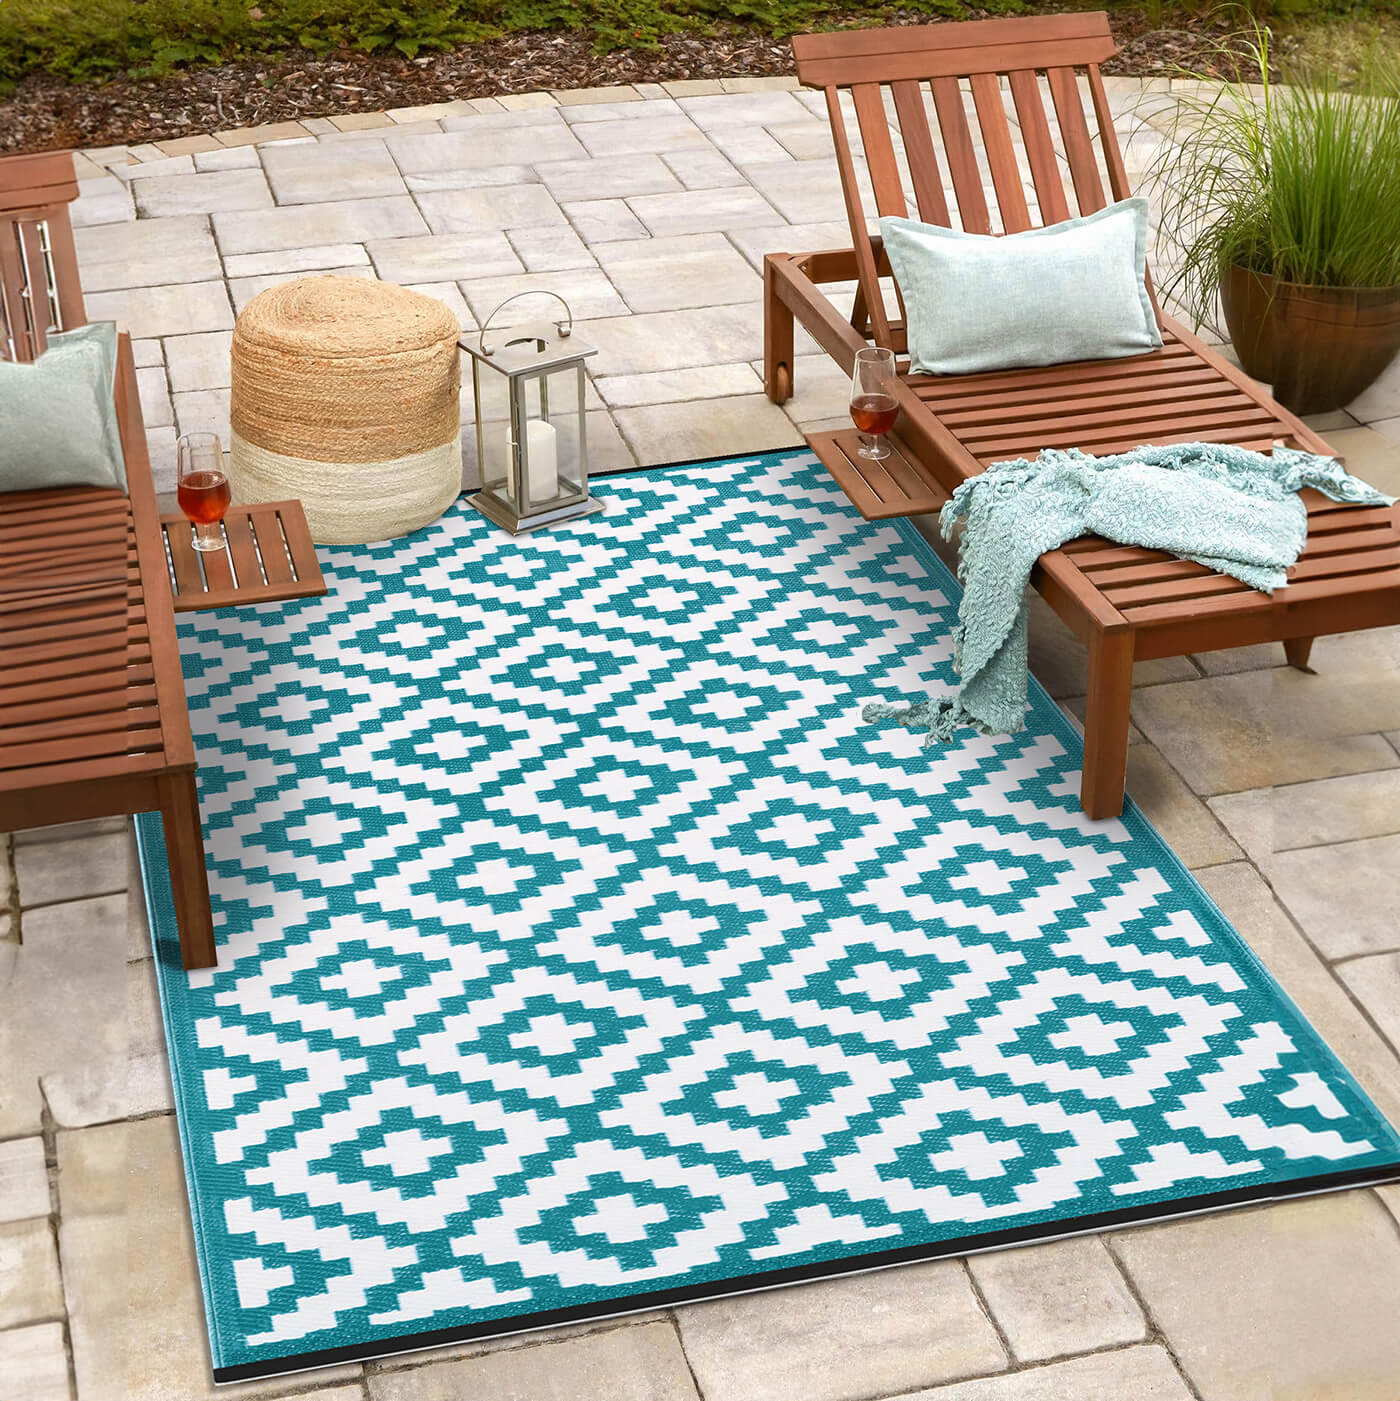 Nirvana Outdoor Recycled Plastic Rug (Teal Blue/White)